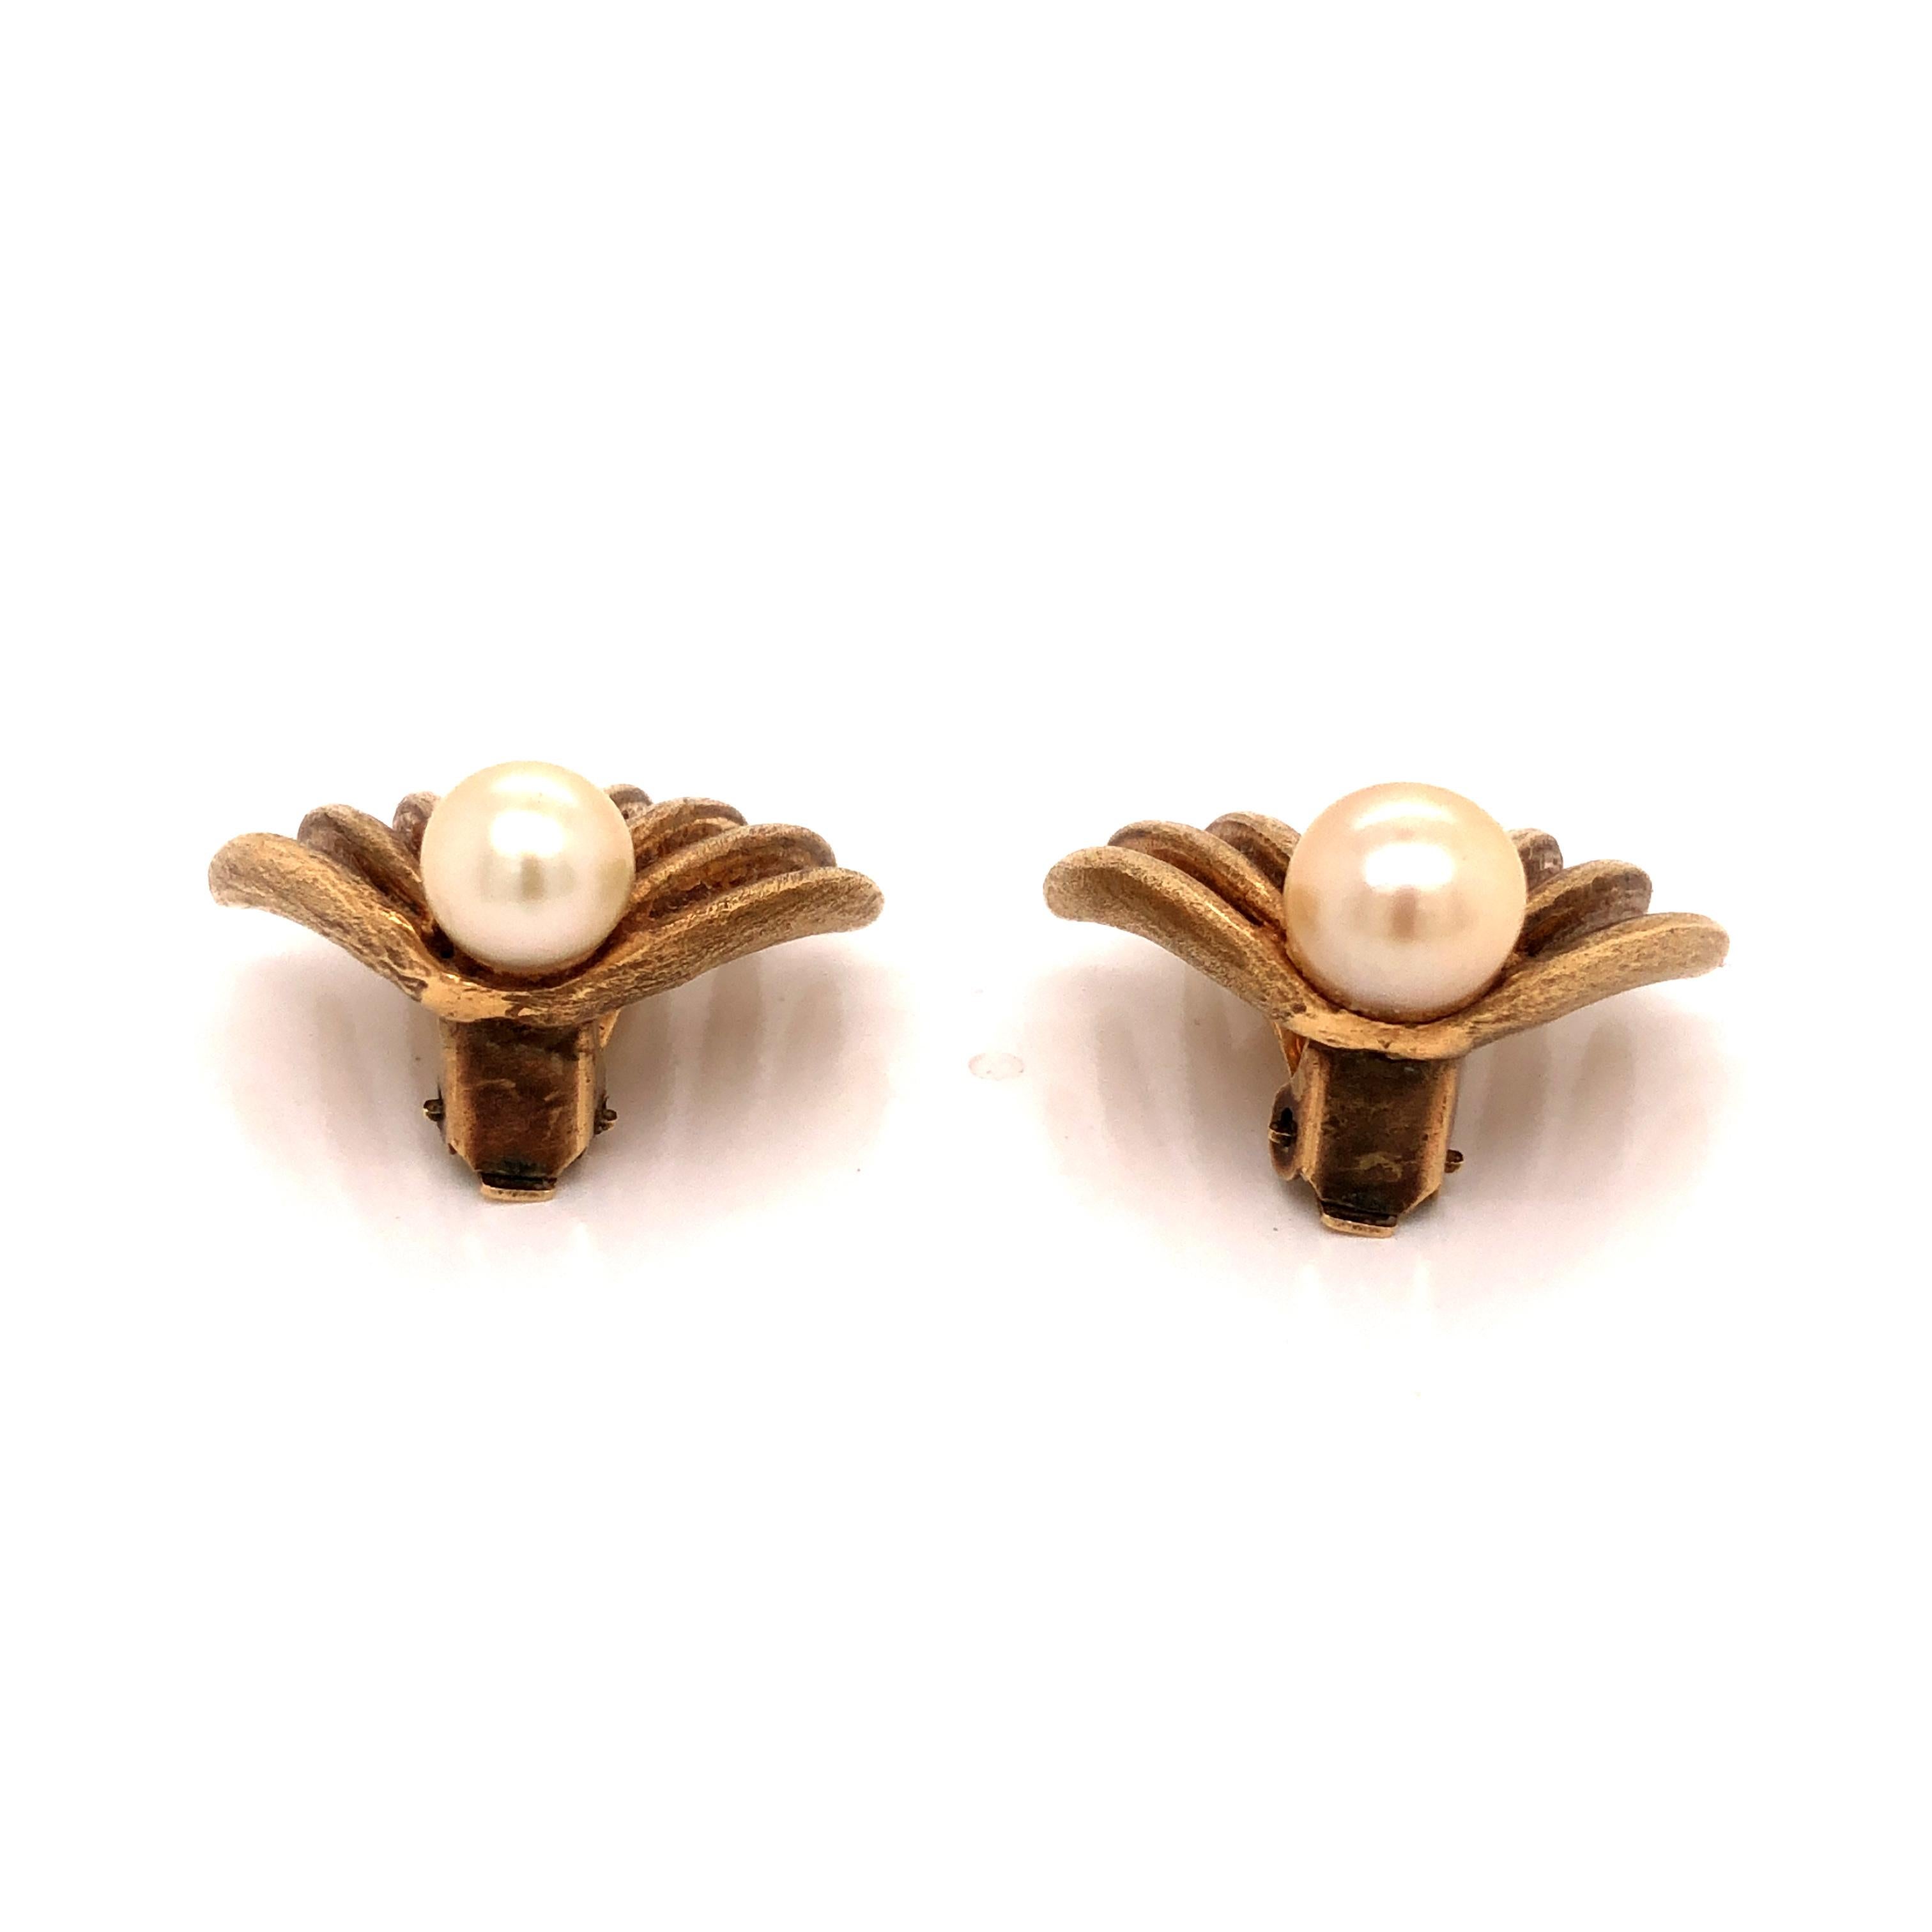 Vintage 14K Yellow Gold Cultured Pearl Earclips

Weight: 19.5 grams
